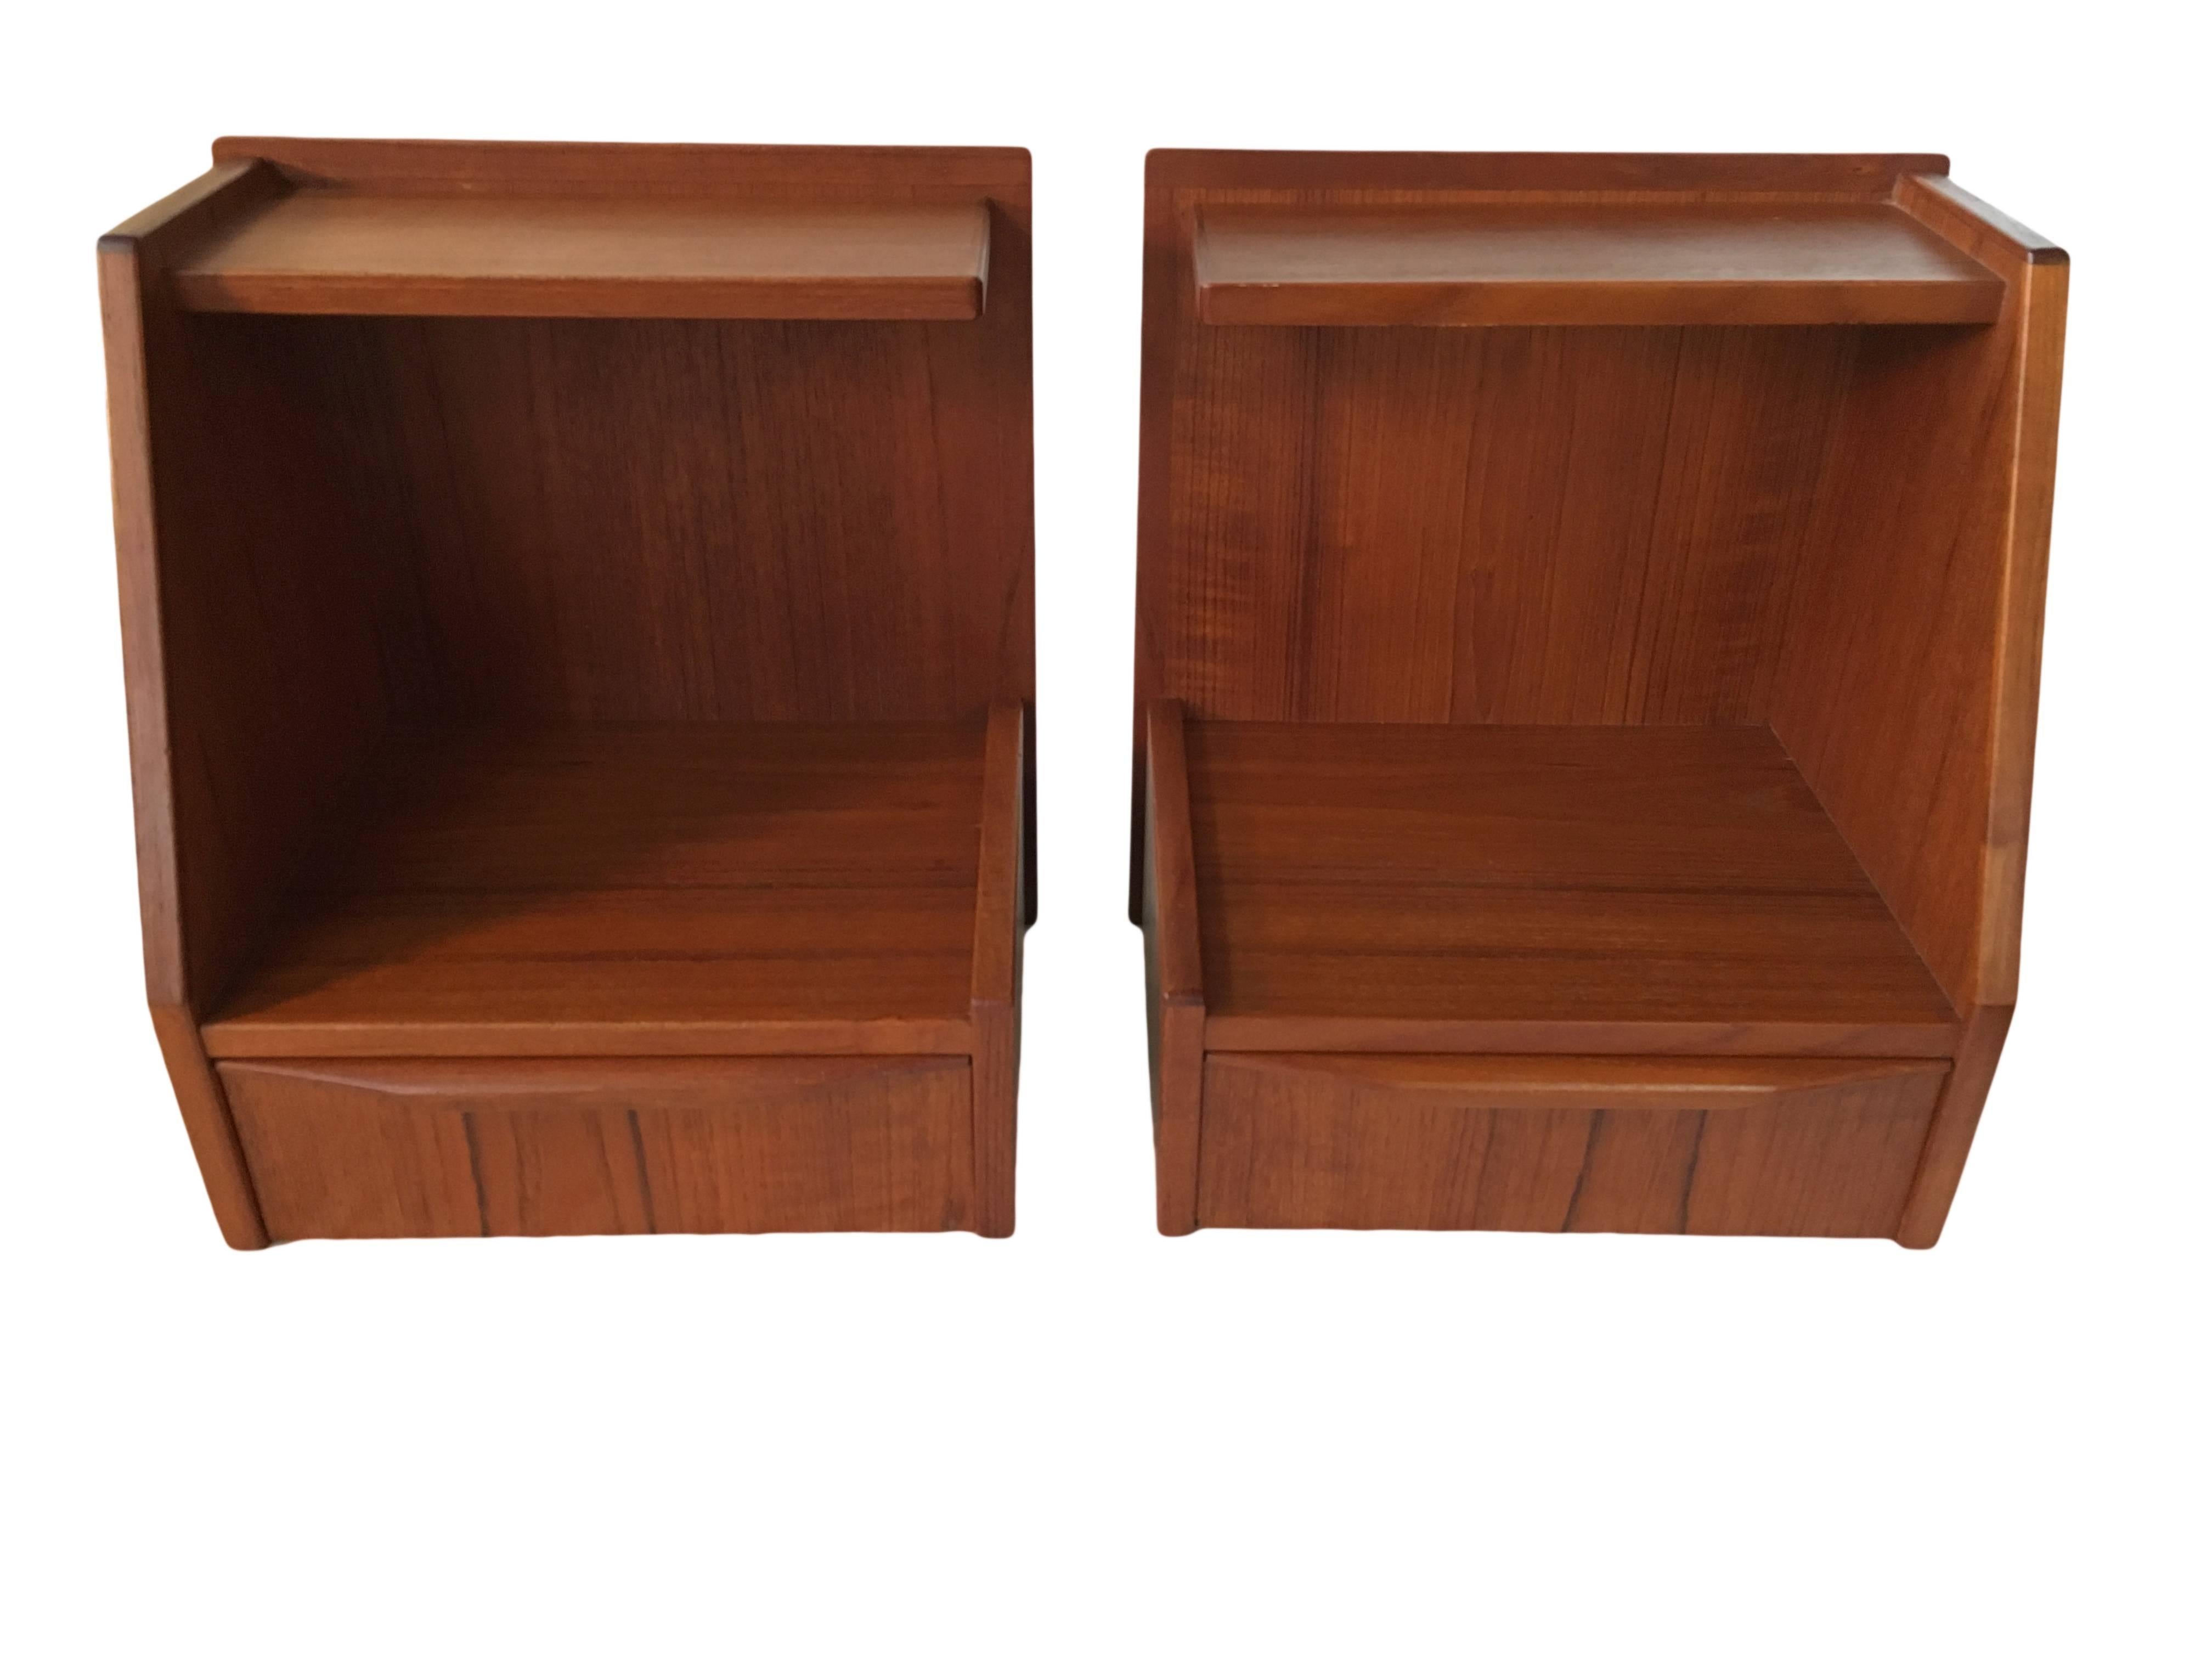 A pair of wall-mounted nightstands in teak. Produced in Denmark, circa 1960.
Great condition.